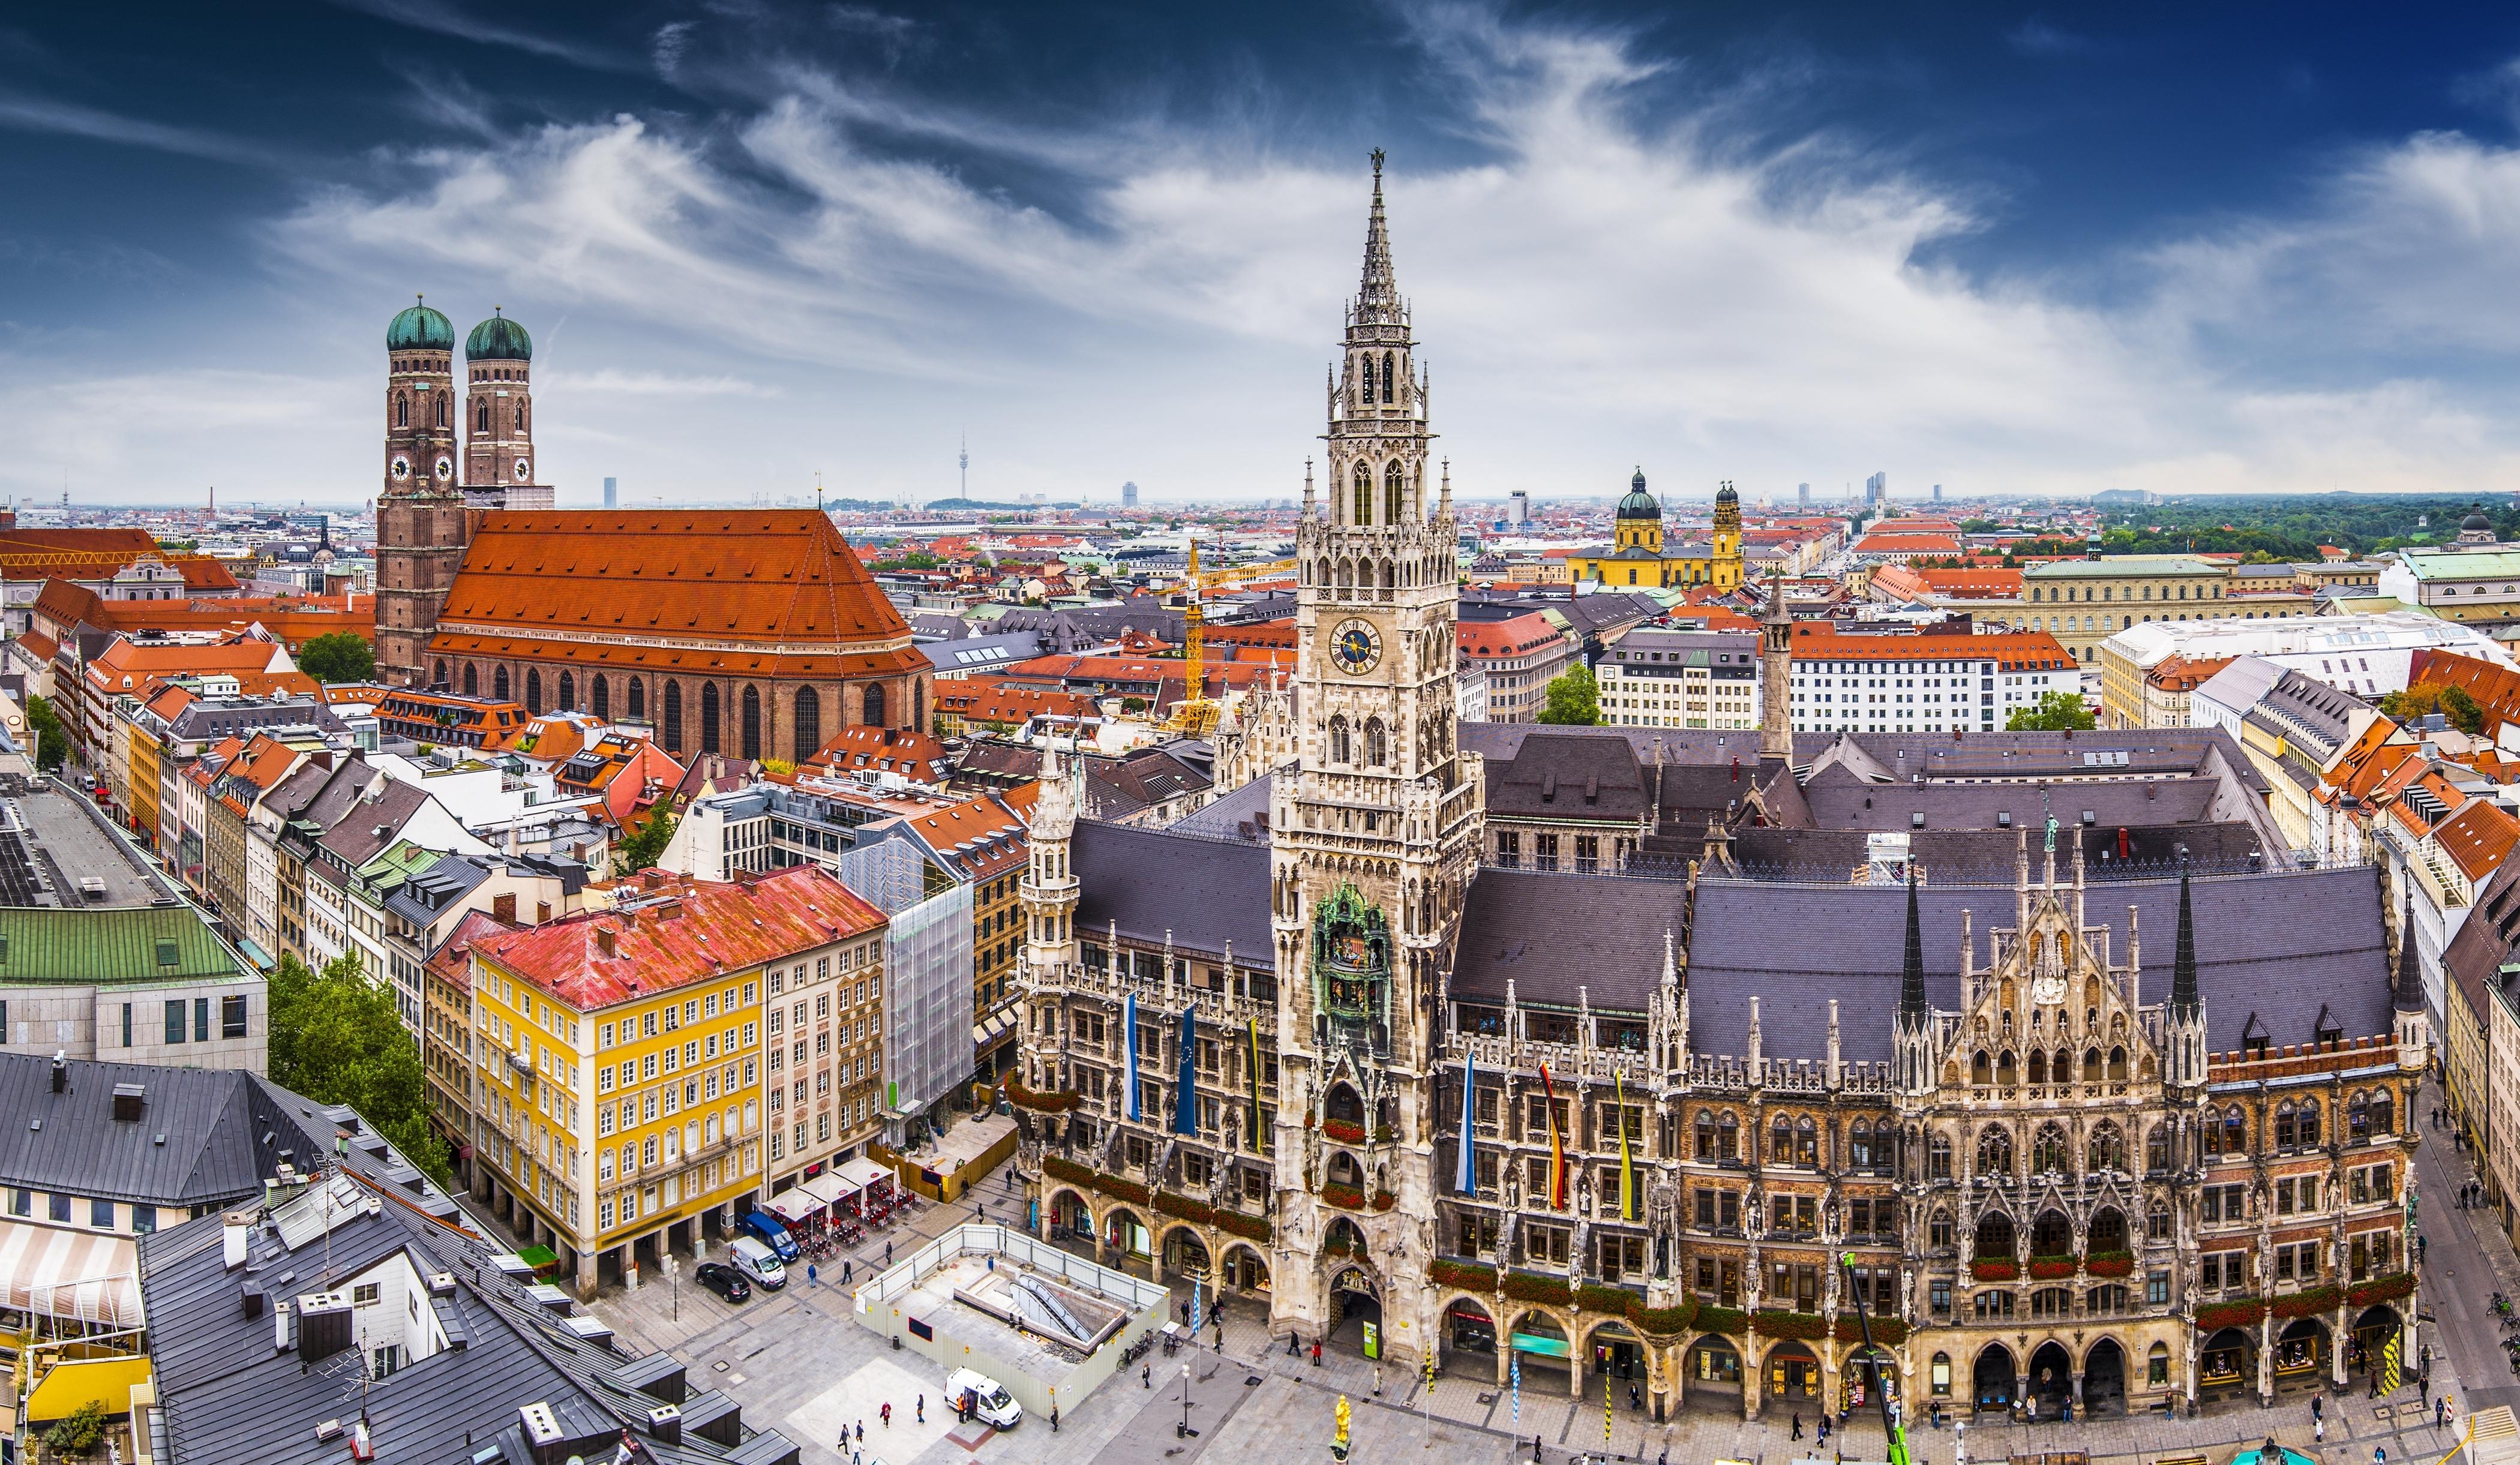 Heiliggeistkirche and Old Town Hall, Munich, Germany бесплатно